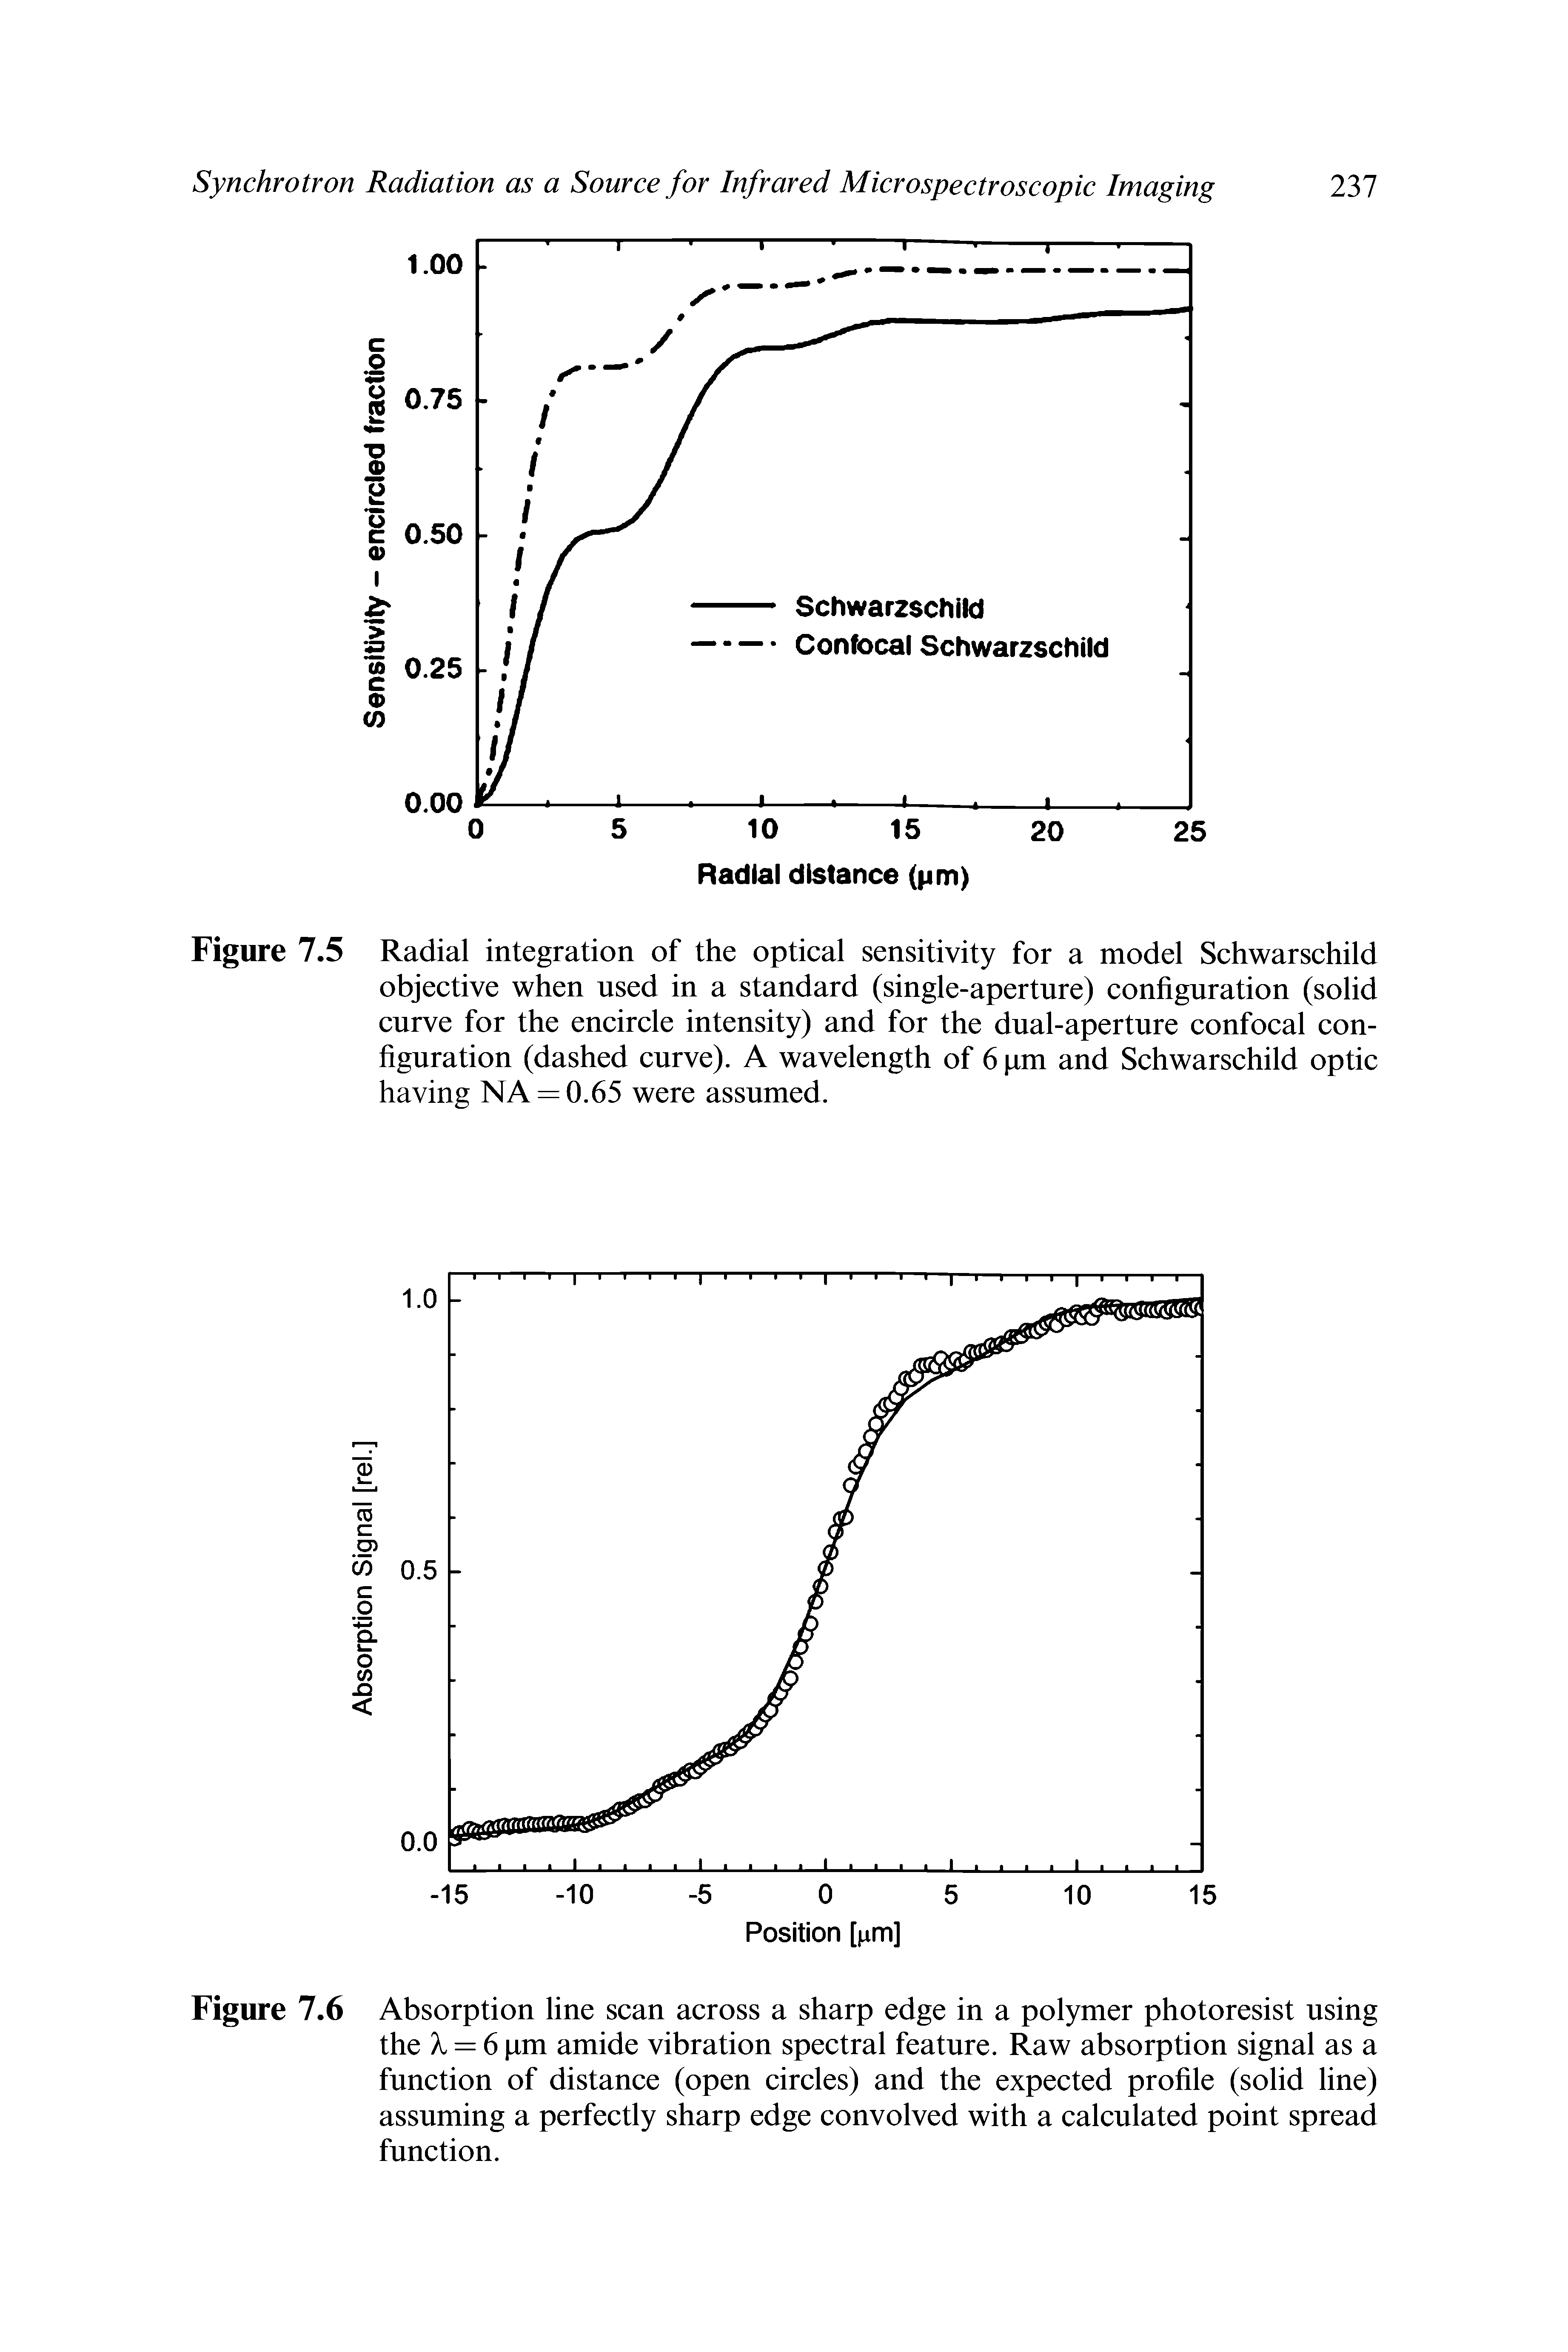 Figure 7.6 Absorption line scan across a sharp edge in a polymer photoresist using the X, = 6 pm amide vibration spectral feature. Raw absorption signal as a function of distance (open circles) and the expected profile (solid line) assuming a perfectly sharp edge convolved with a calculated point spread function.